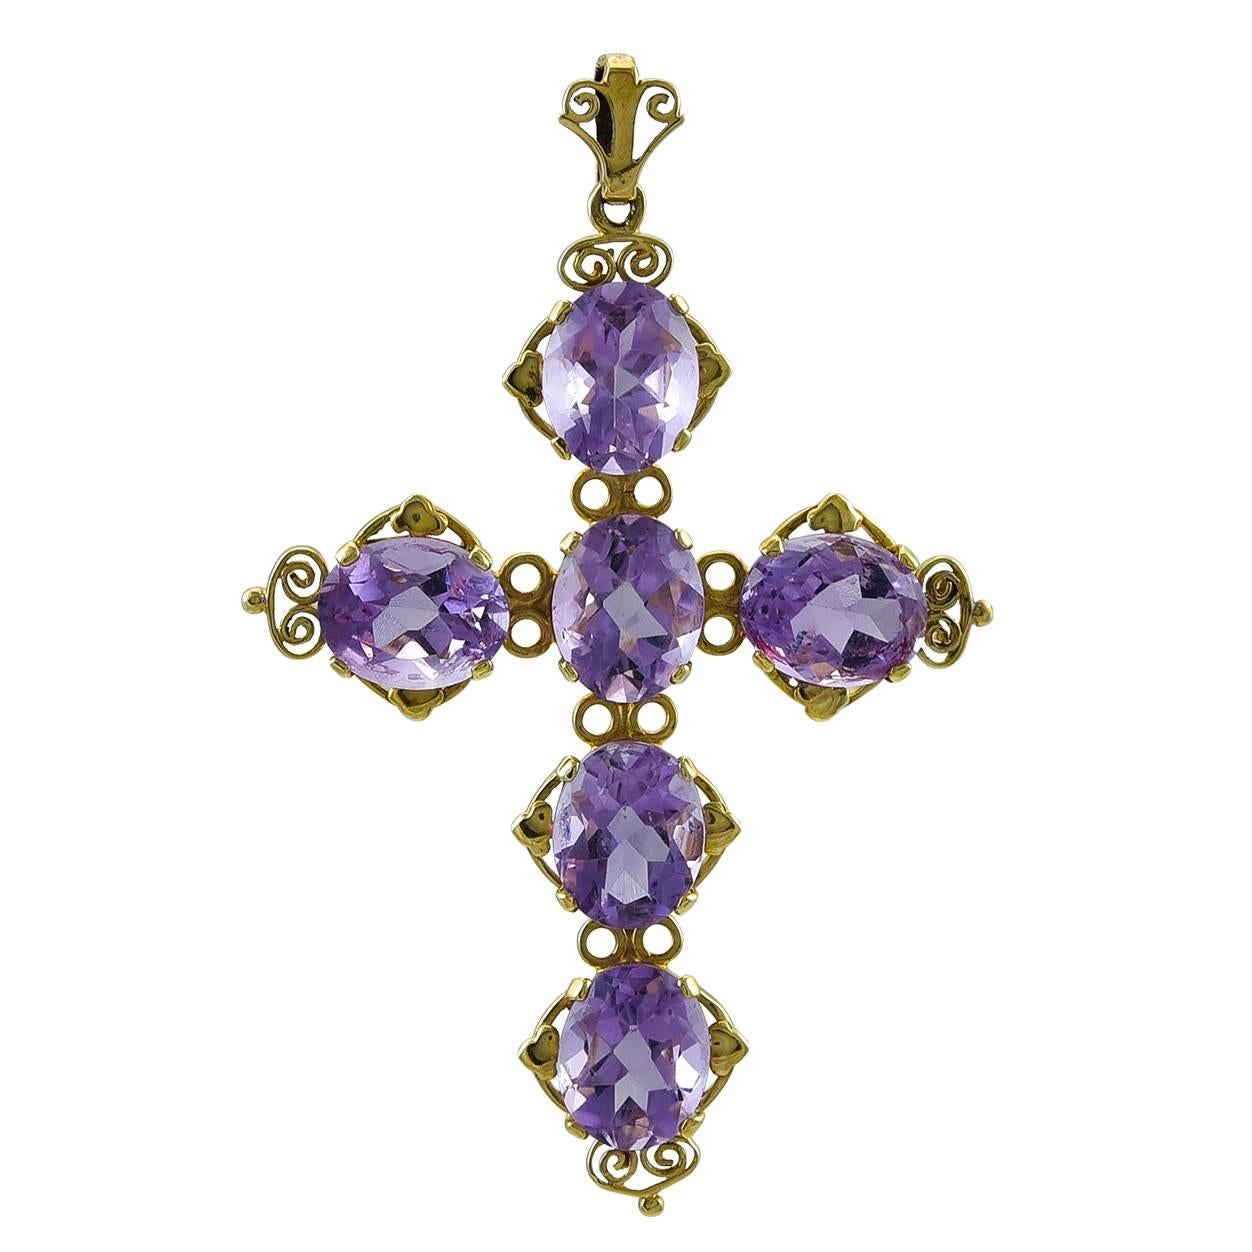 Large Amethyst and Gold Cross